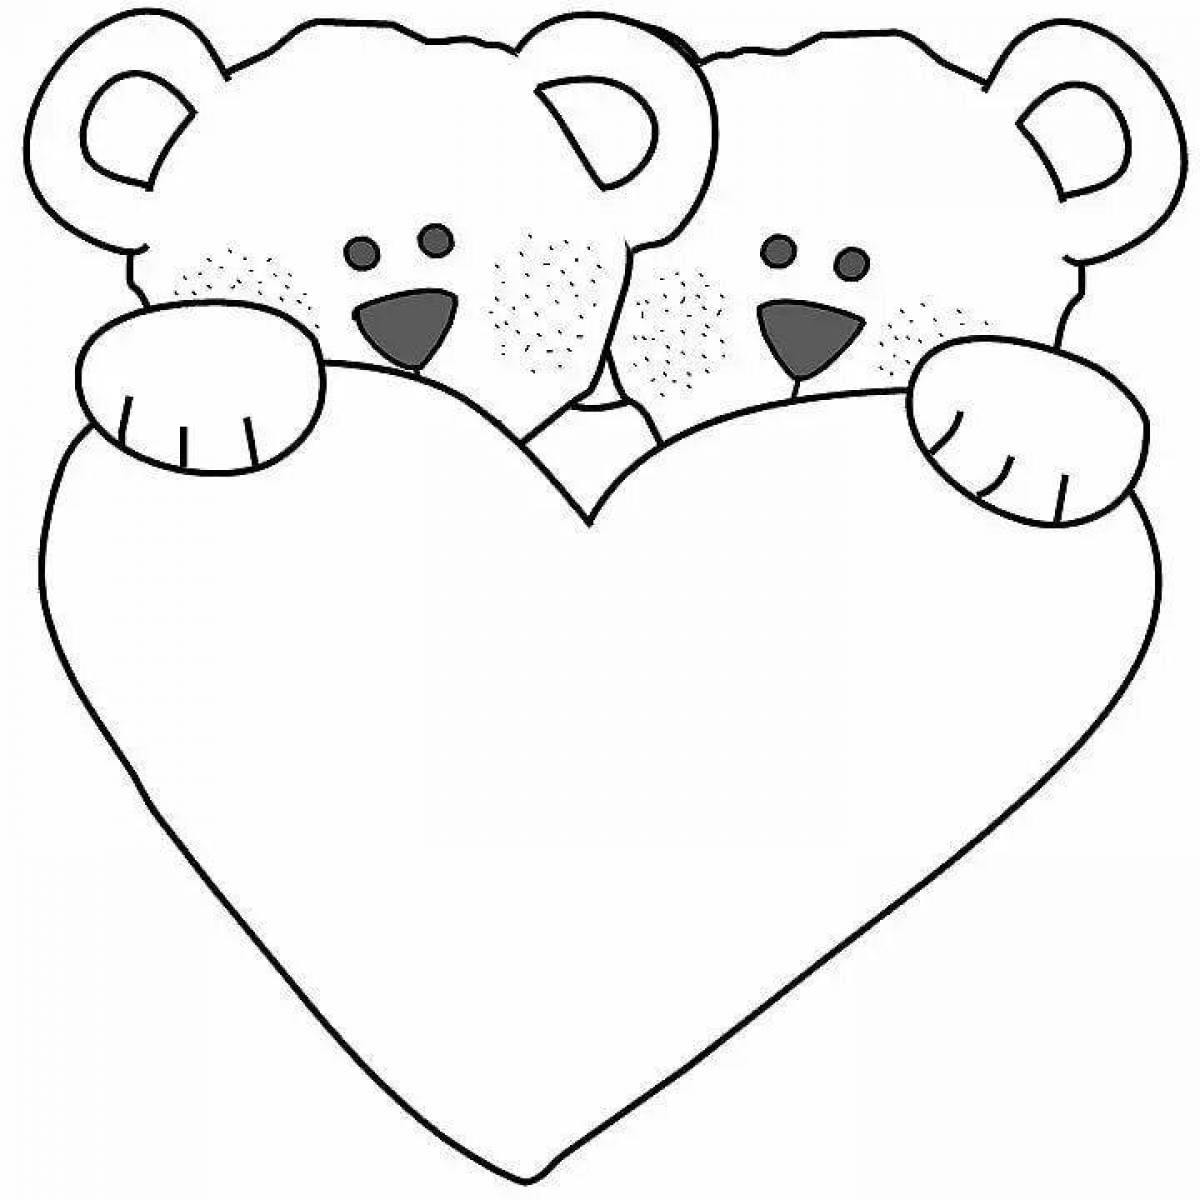 Coloring page happy teddy bear with a heart